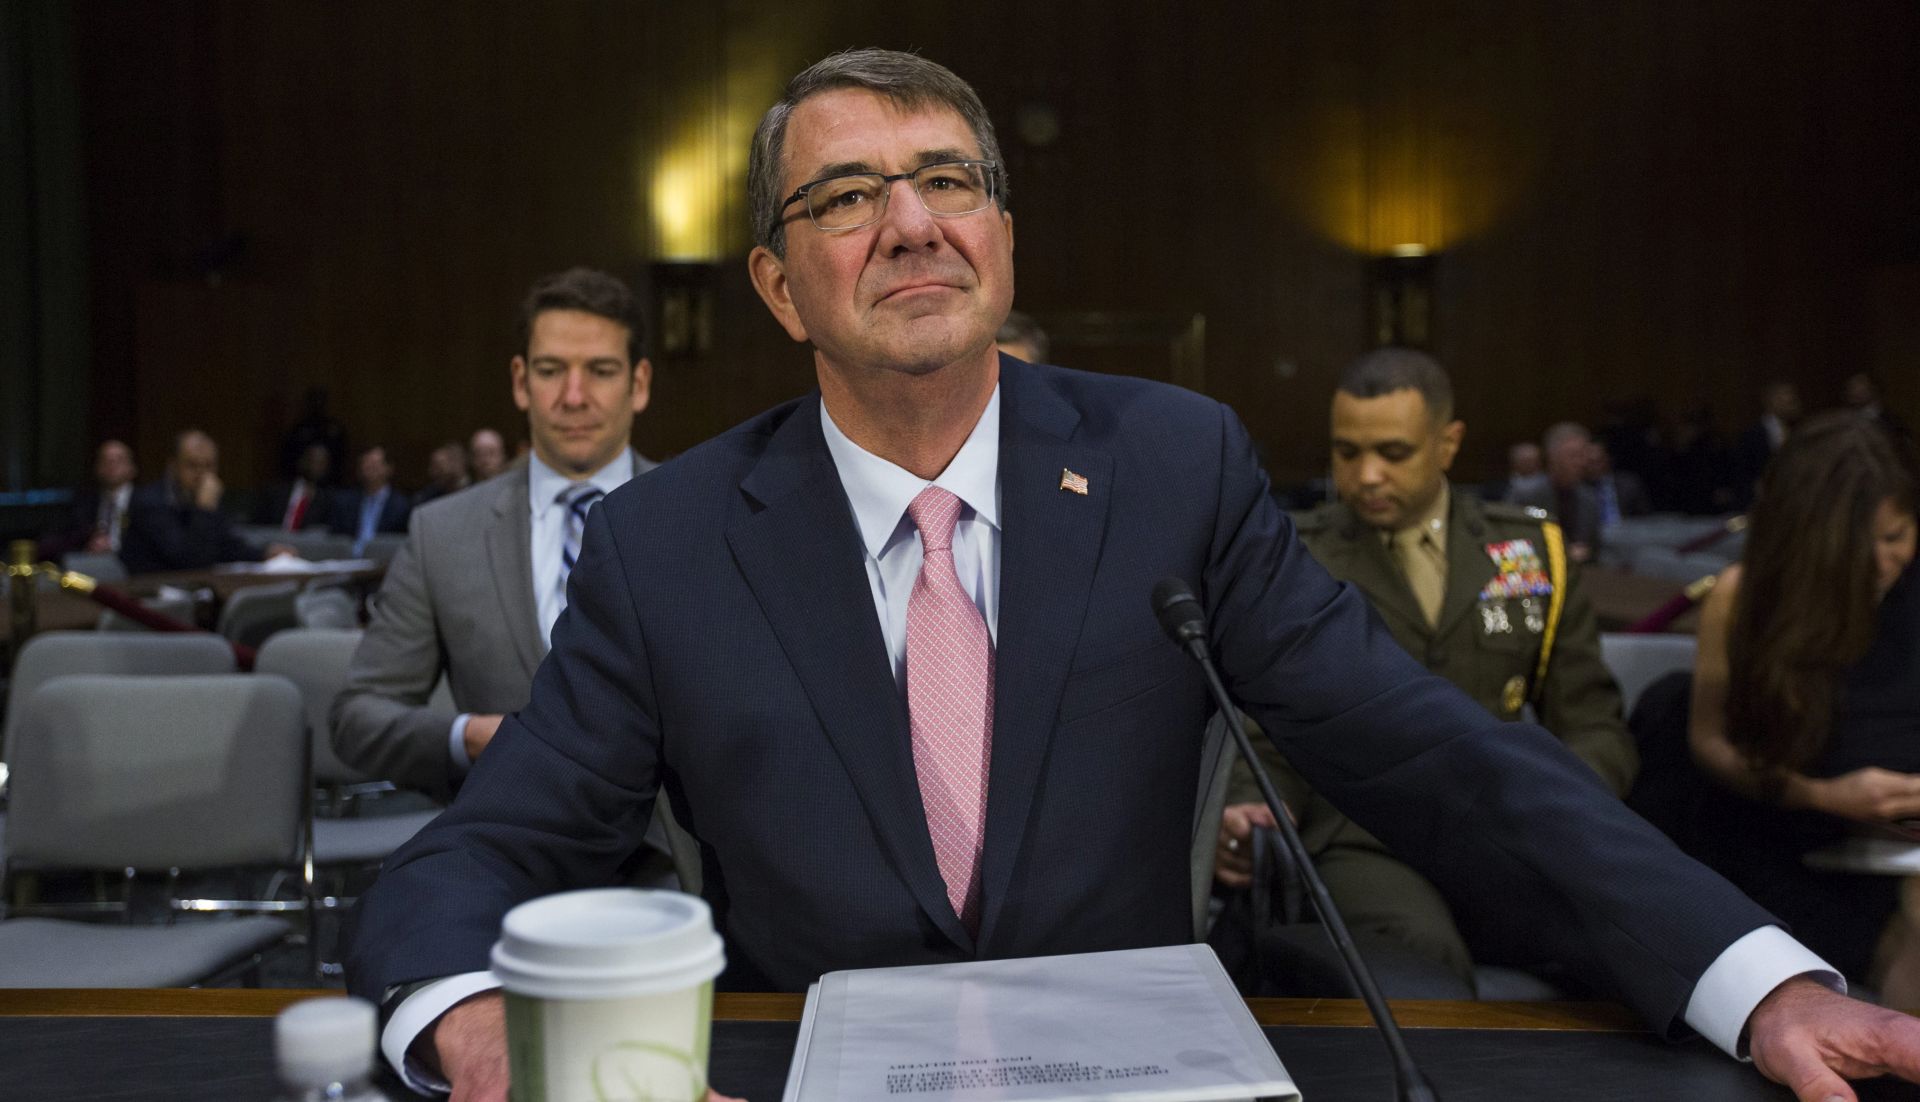 epa05061660 US Defense Secretary Ashton Carter prepares to testify at a Senate Armed Services Committee hearing on the Obama administration's strategy to counter the so-called Islamic State (ISIS) as well as US policy toward Iraq and Syria in the Dirksen Senate Office Building in Washington, DC, USA, 09 December 2015. The US will be sending Special Operations Forces into Syria to counter ISIS.  EPA/JIM LO SCALZO